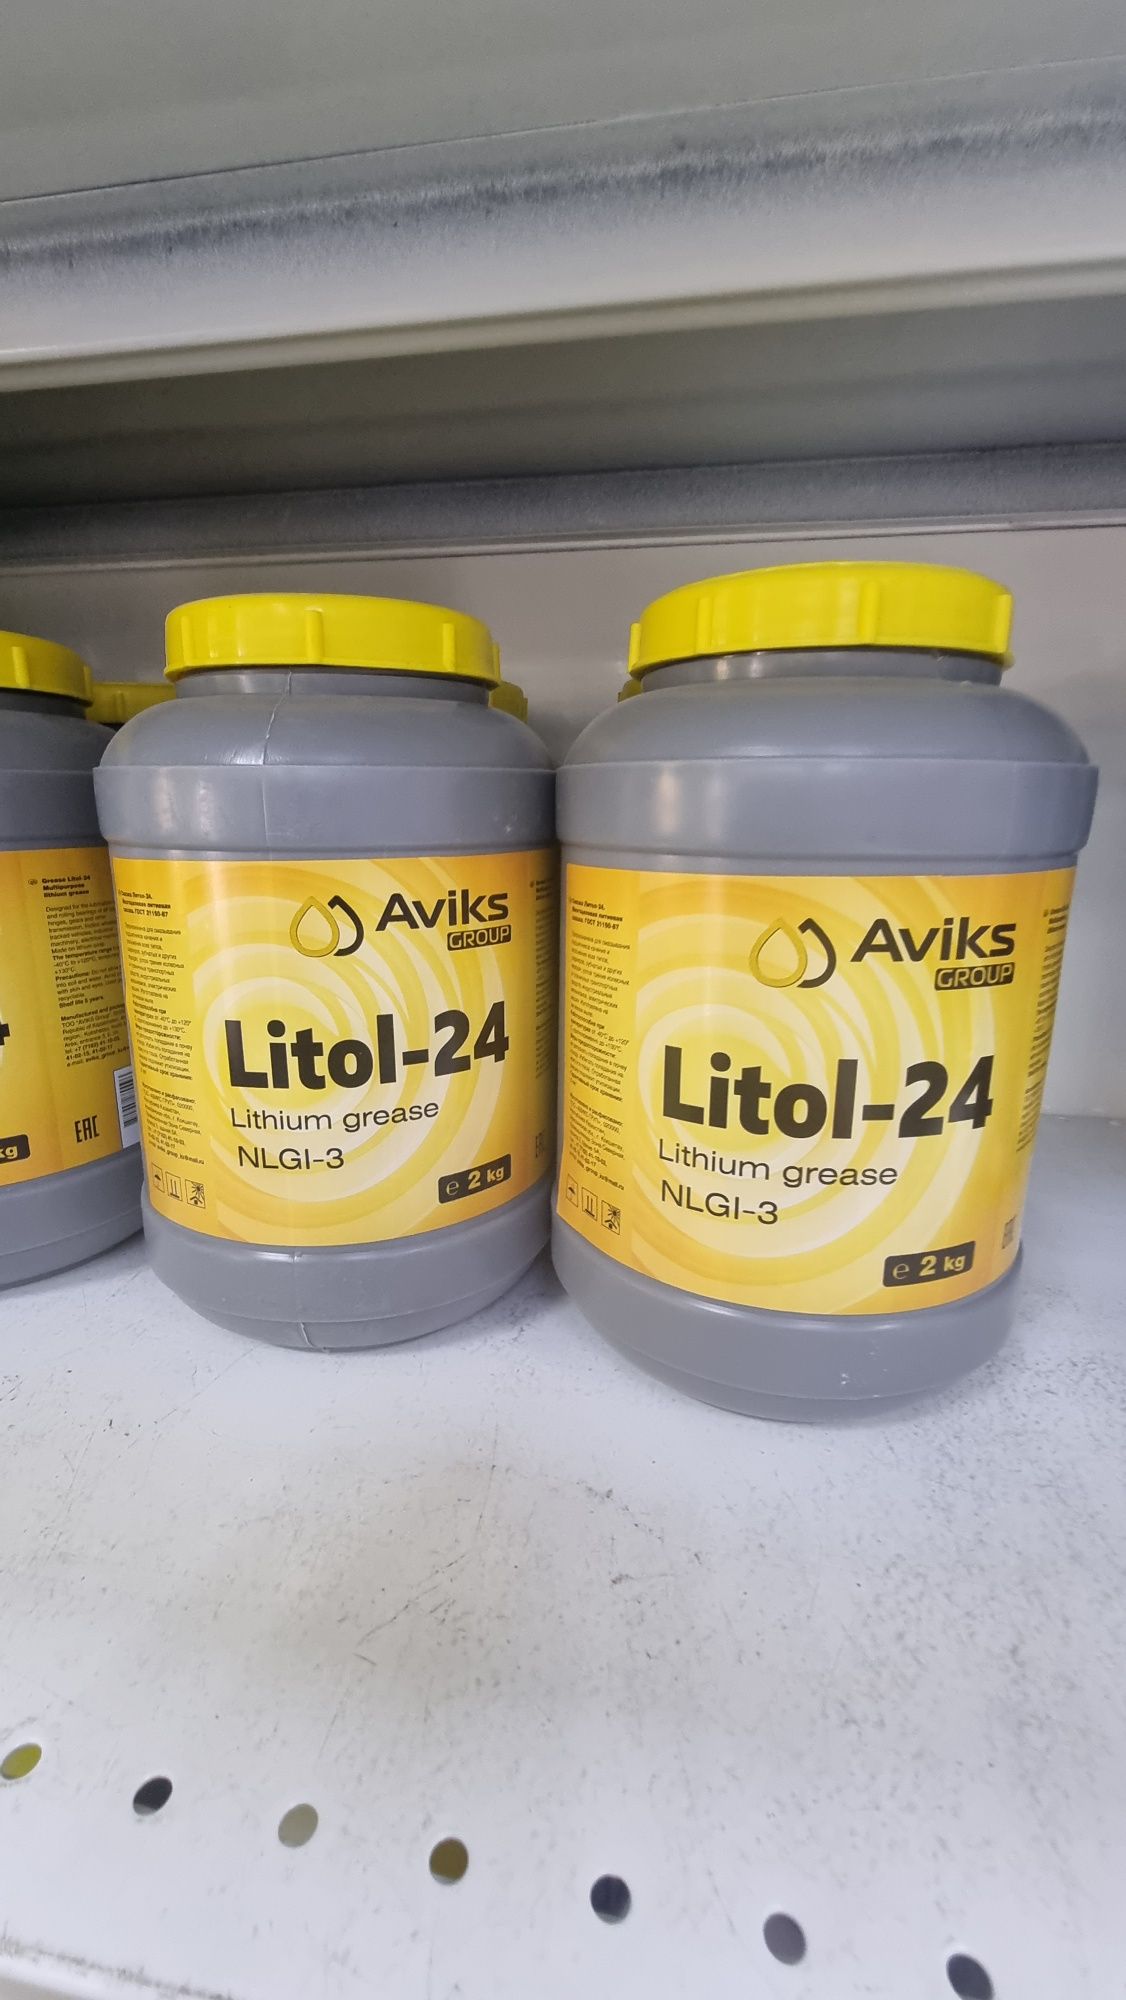 Смазка AVIKS Lithium Grease Blue.